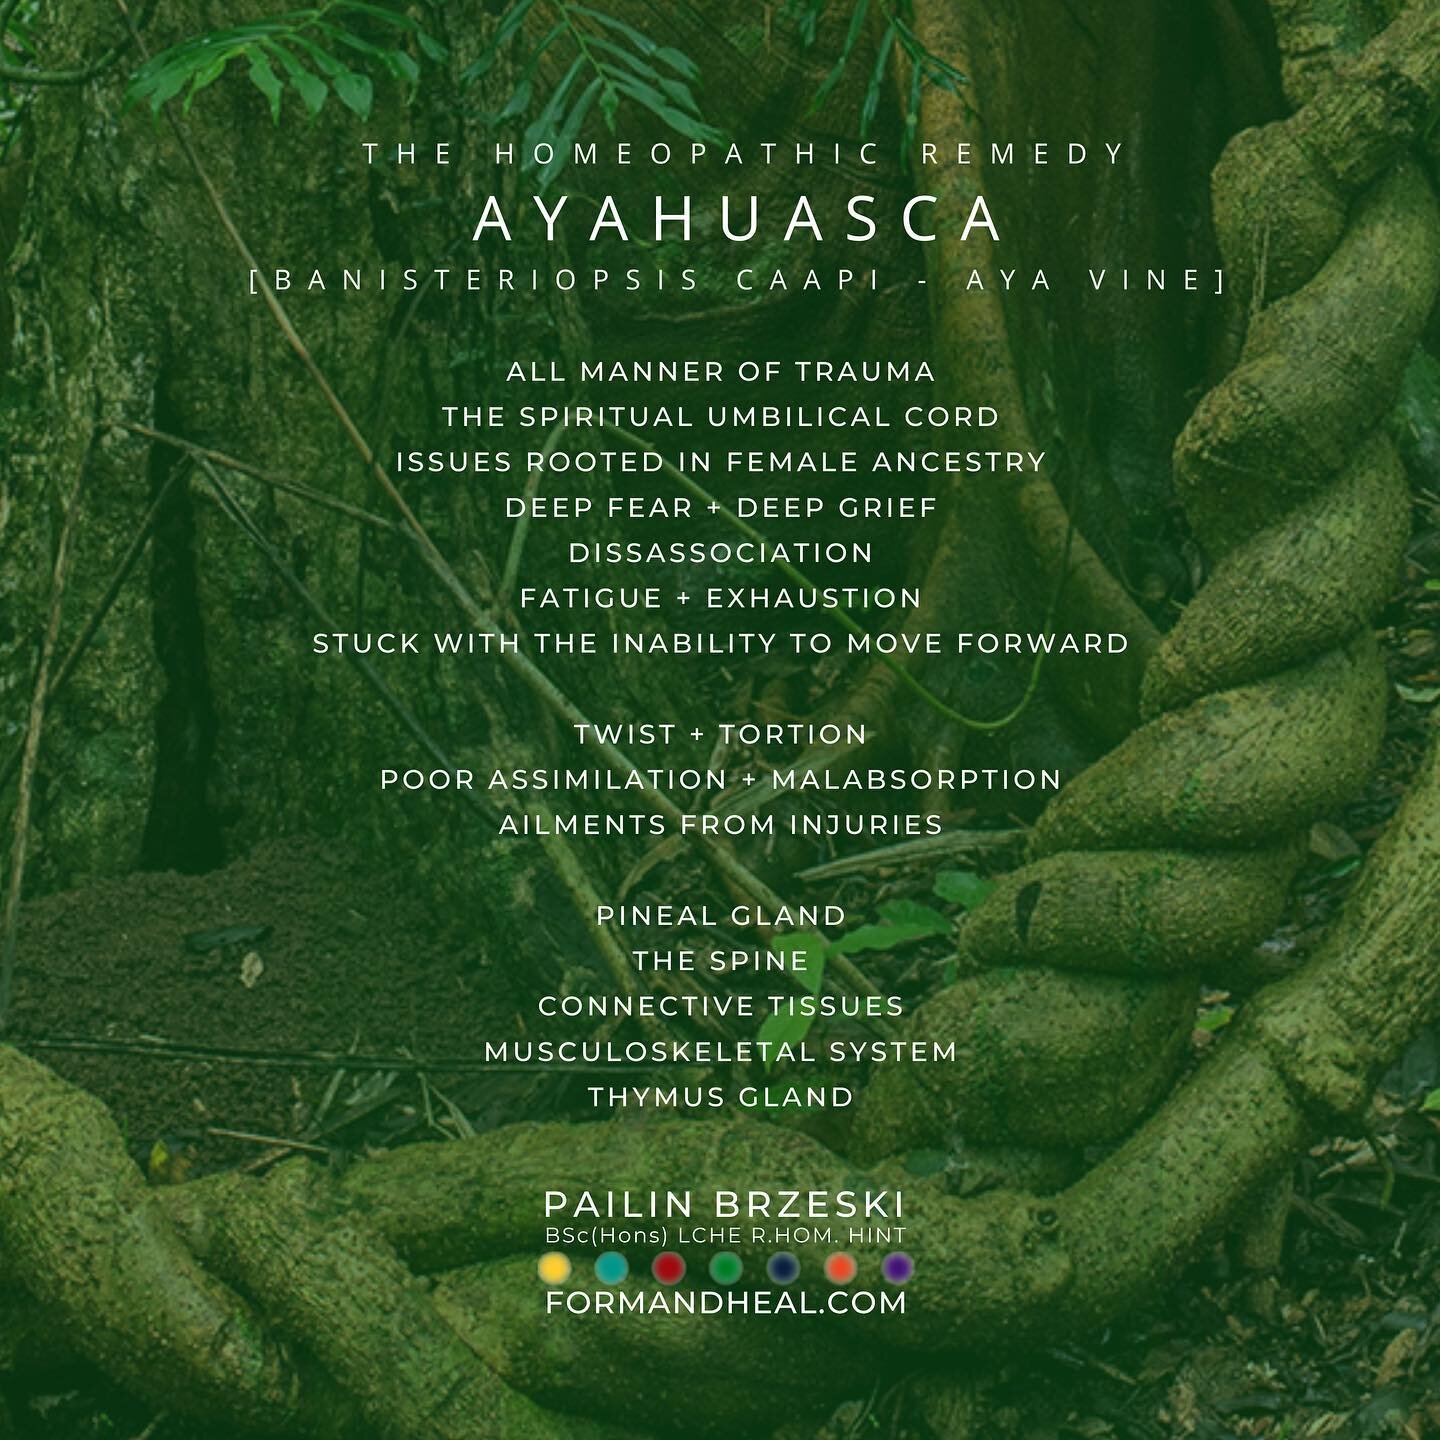 The homeopathic remedy AYAHUASCA [Banisteriopsis Caapi / Aya Vine] is formative where TWIST + TORTION has established itself through the musculoskeletal patterning of the body, particularly where TRAUMA or INJURY are causative factors. AYAHUASCA take